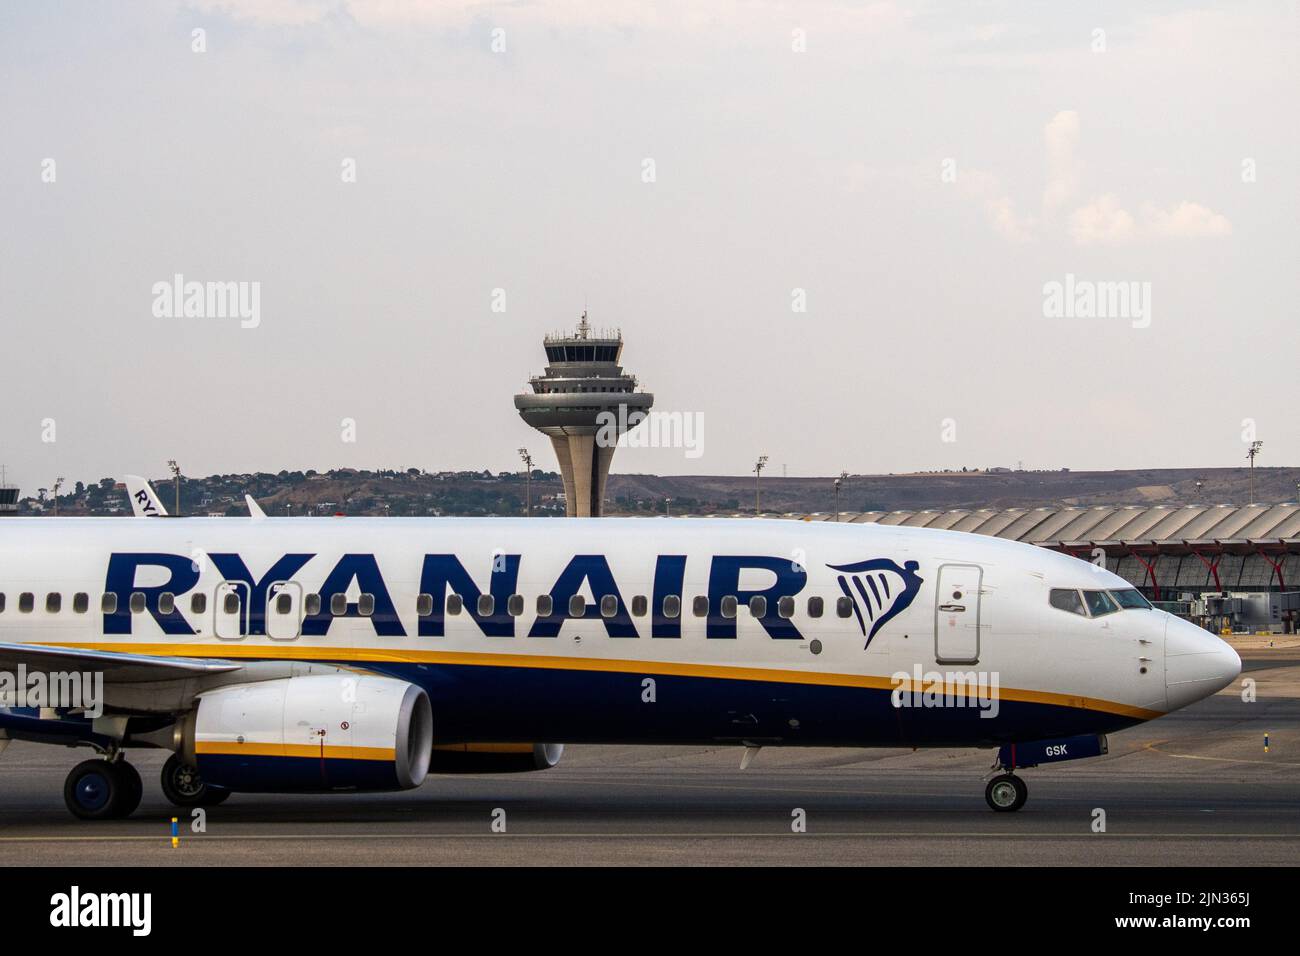 A Ryanair airplane in seen on the runway at Adolfo Suarez Madrid Barajas Airport passing by the air traffic control tower. Stock Photo